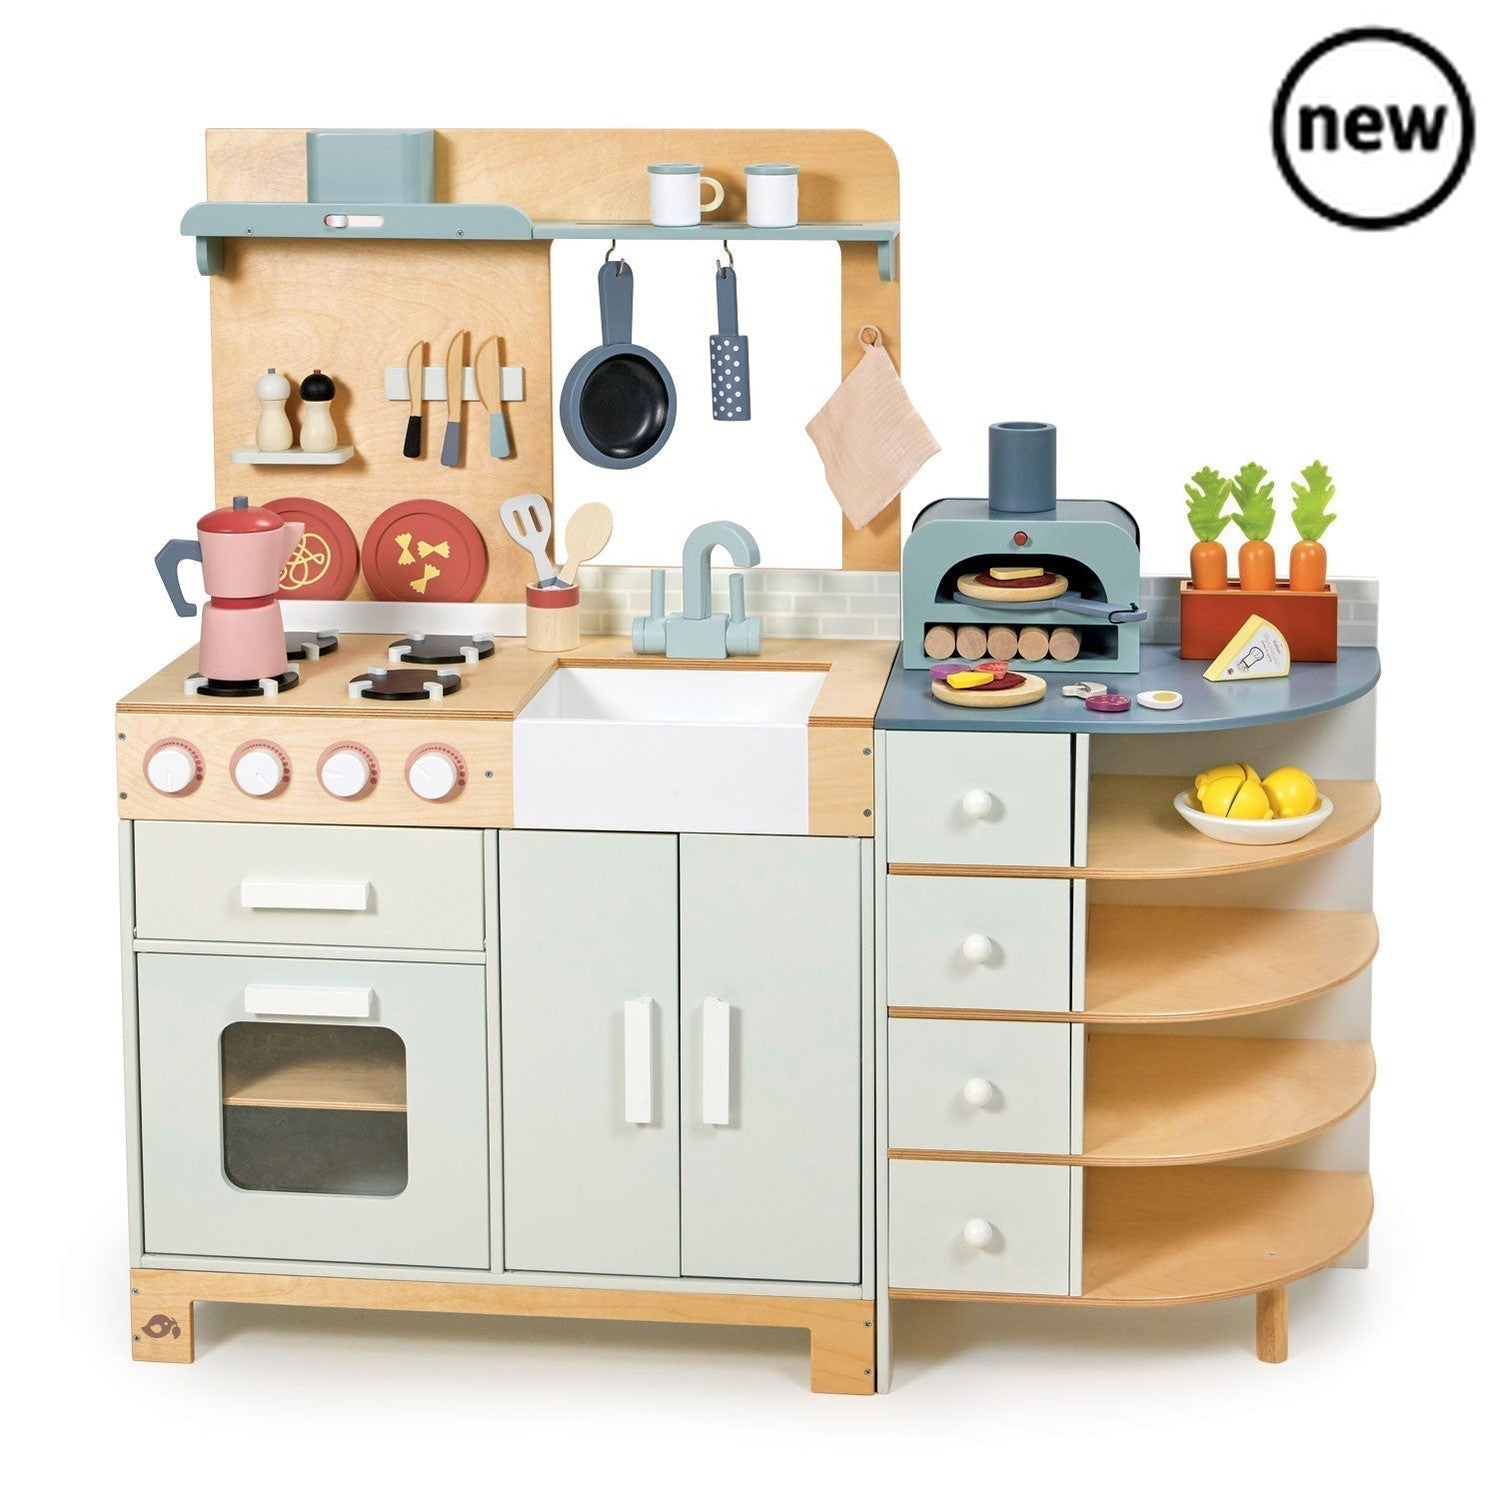 Tenderleaf Toys Wooden La Fiamma Grand Kitchen, Cook great foods in this magnificent La Fiamma Kitchen! A two-part kitchen - sink and cooker with back board, and a storage unit with pizza oven. Unit includes oven and grill with 4 clacking buttons, and double door storage unit under the sink. Features lots of accessories including: A pizza oven with 5 wooden logs Pizza plate 2 pizza bases 2 felt toppings, egg, onion, cheese, mushroom, pineapple, pepperoni, parmesan Grater Frying pan 2 wooden utensils in a po